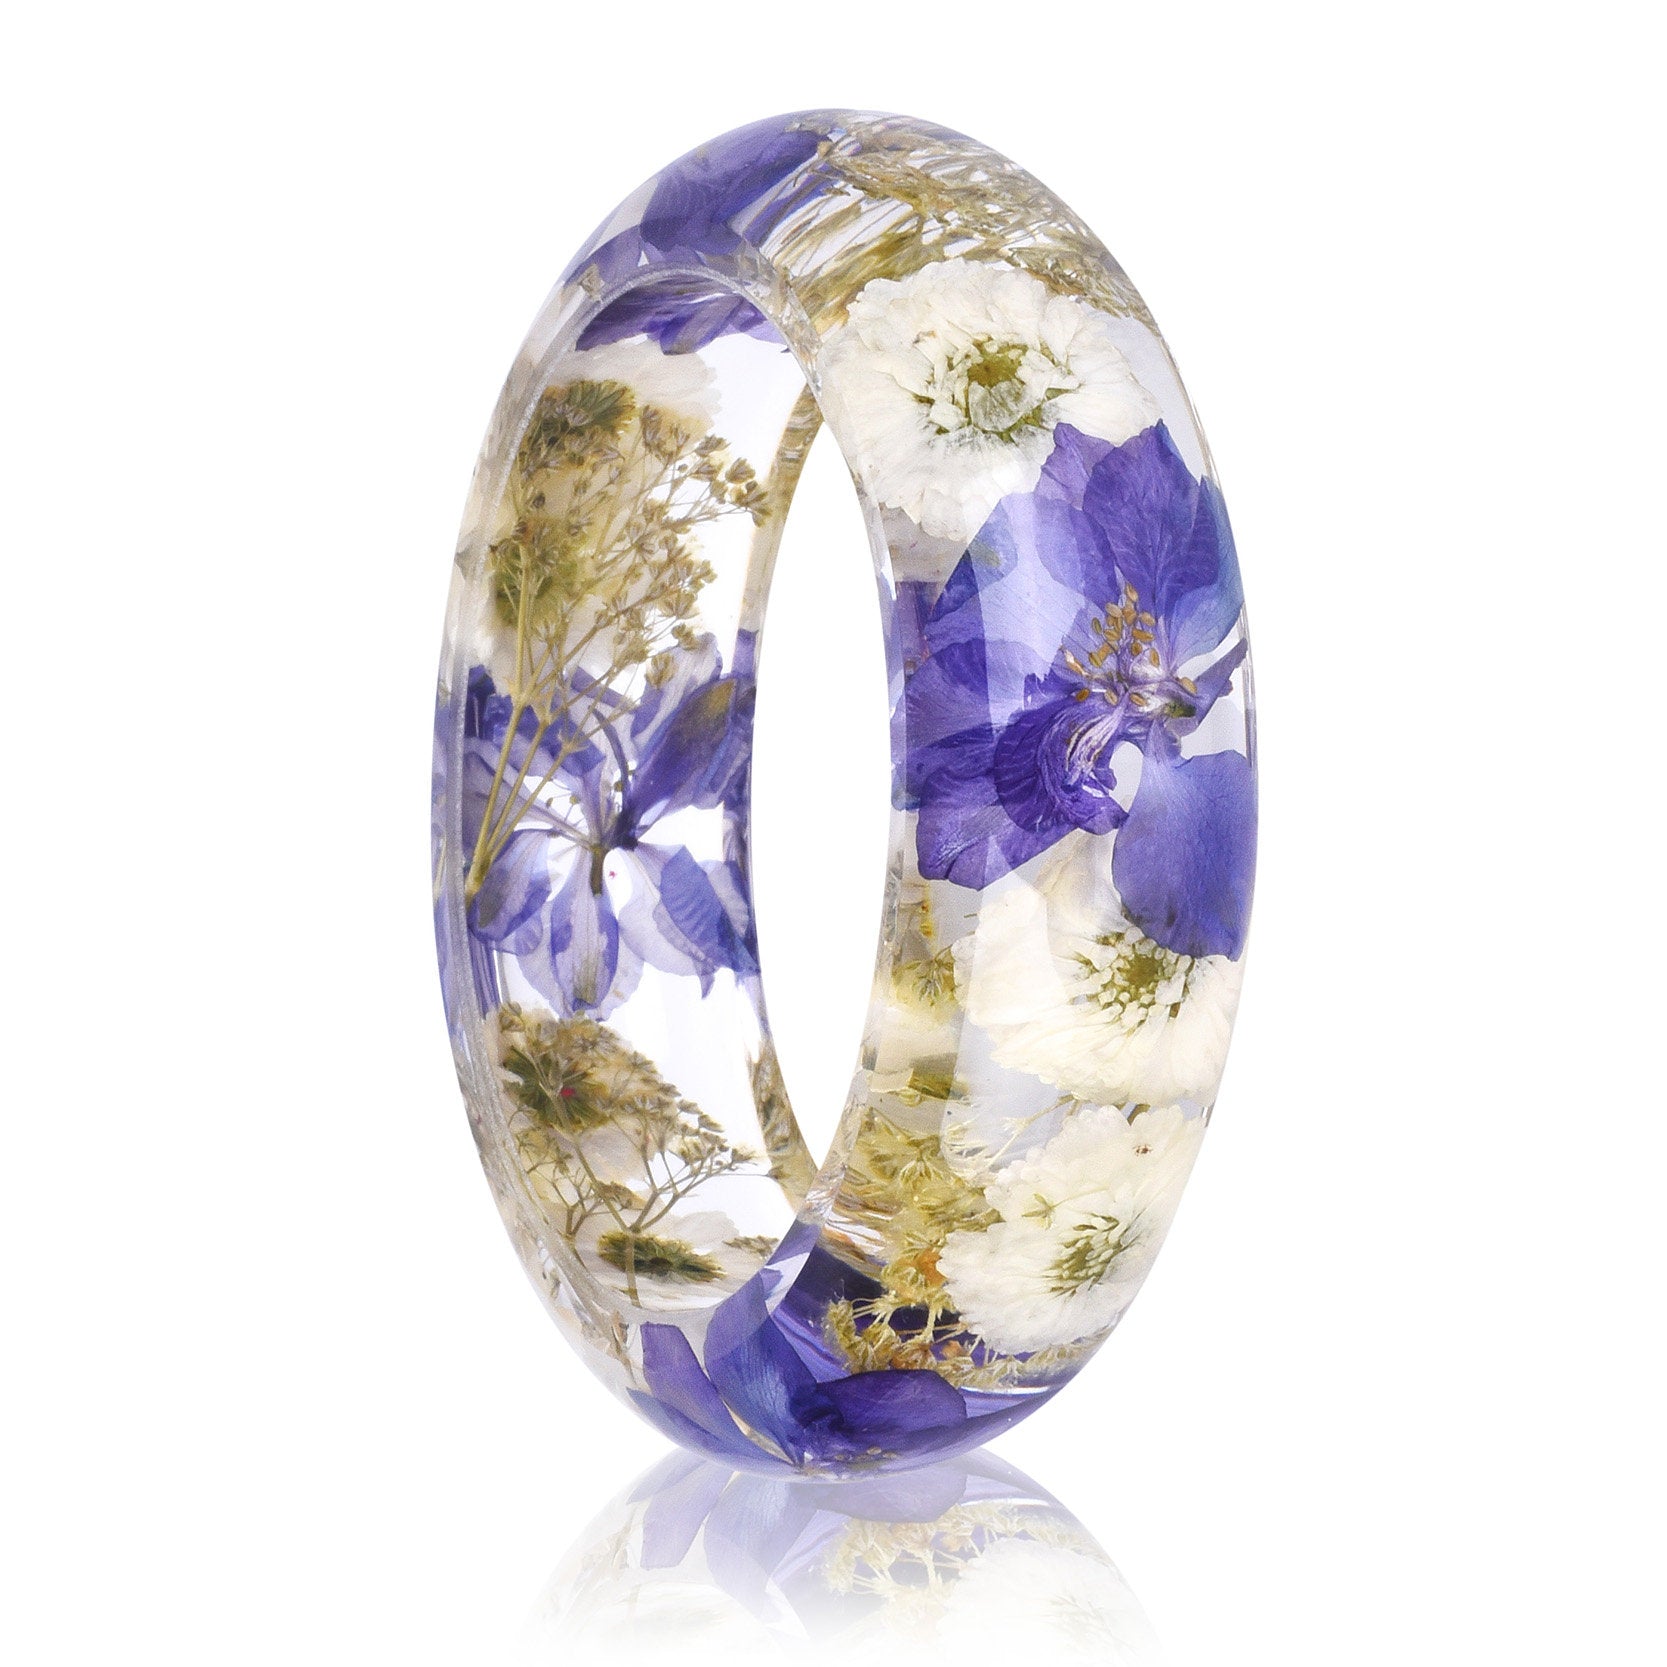 Resin Bangle Bracelet Preserved Dried Flowers Clear Resin with